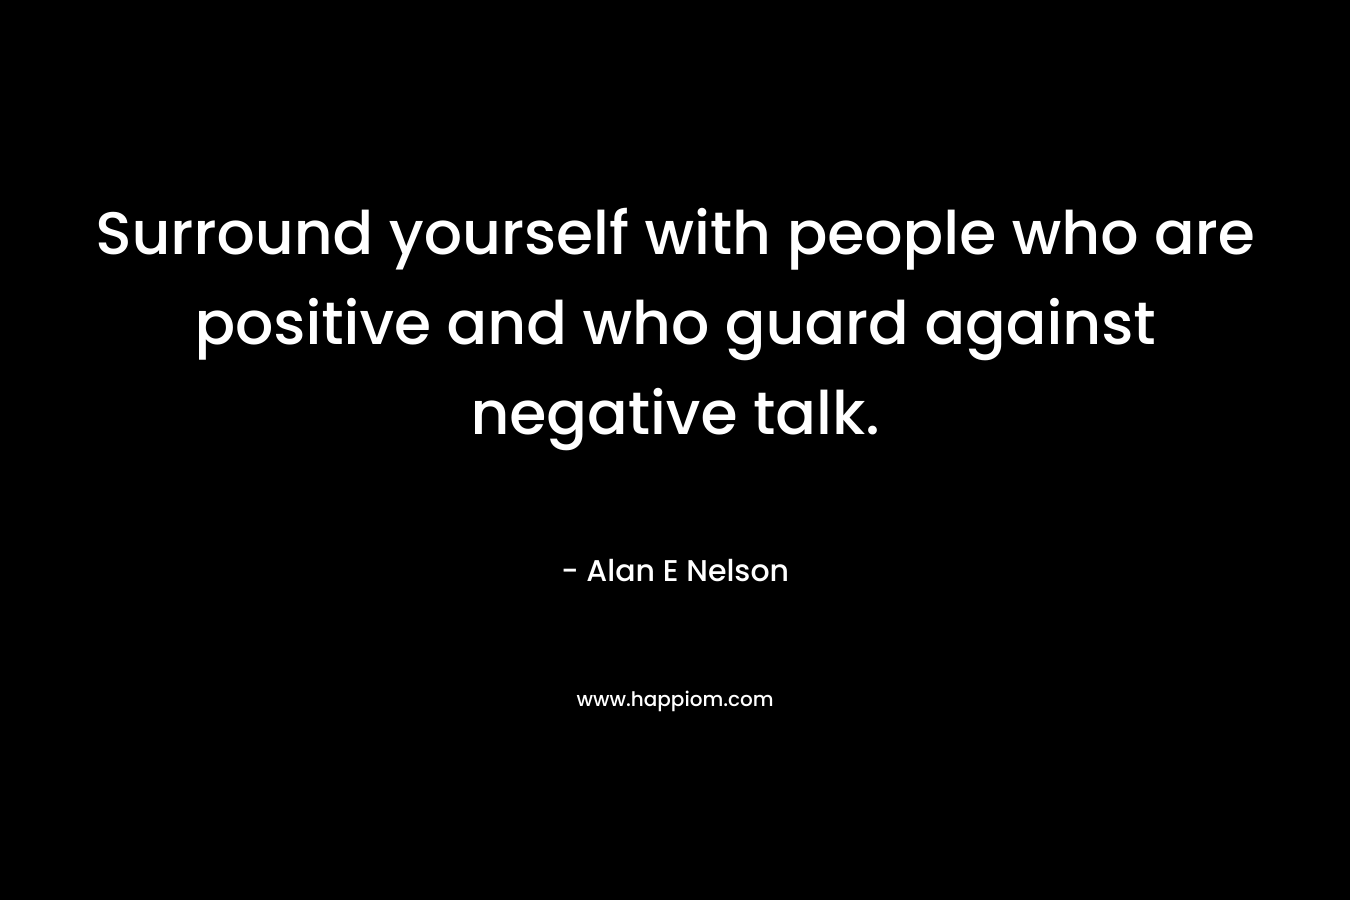 Surround yourself with people who are positive and who guard against negative talk.